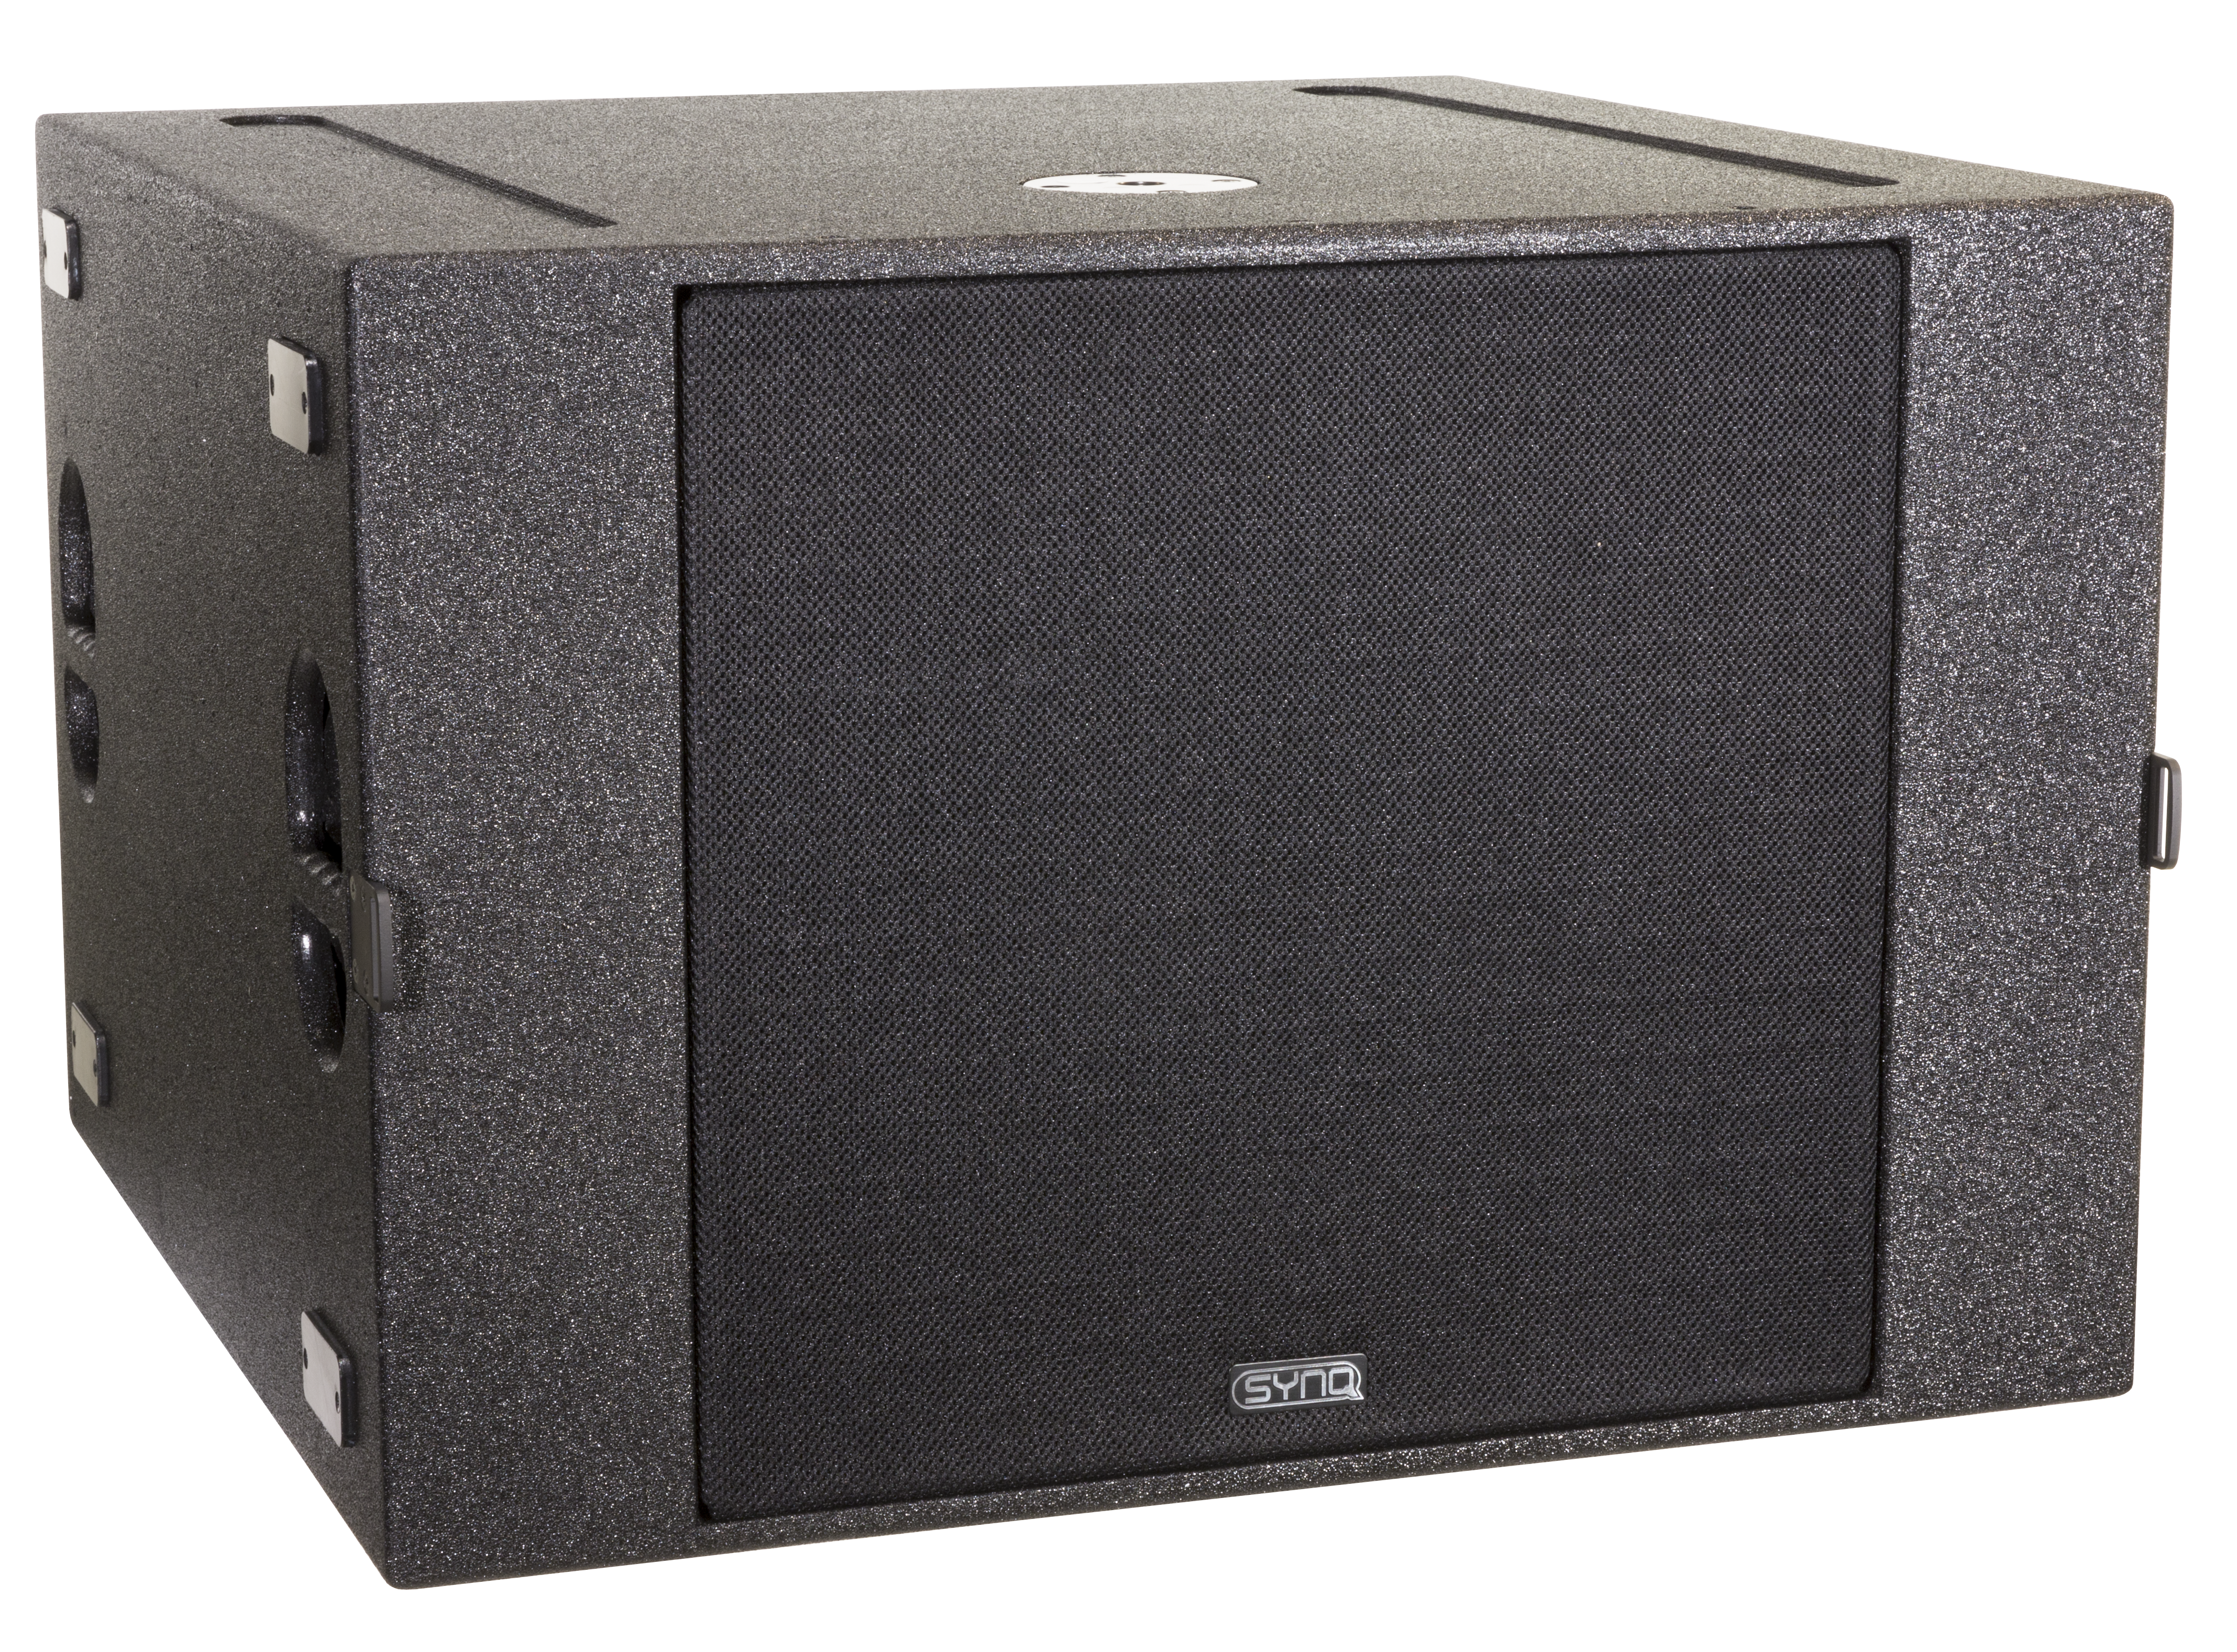 Extremely powerful and compact double 15" subwoofer